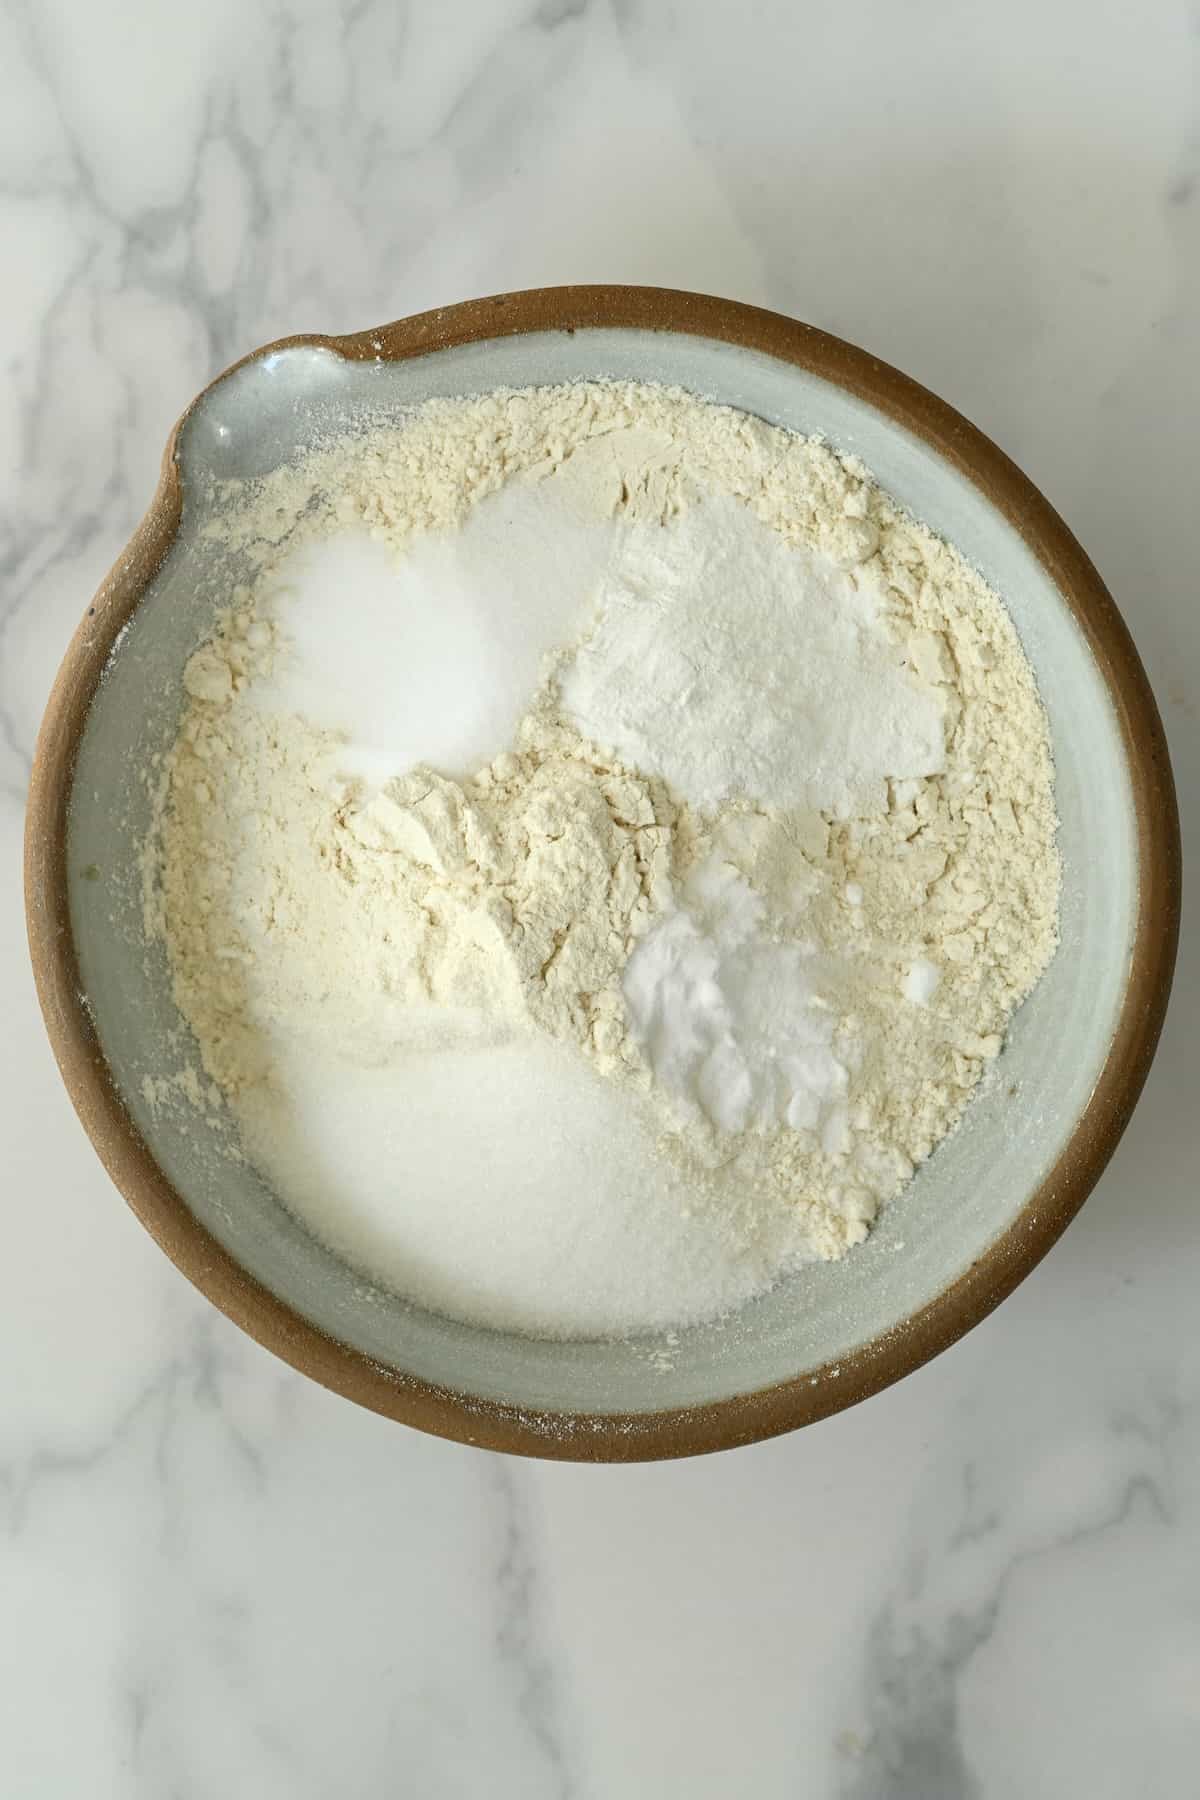 A bowl with flour and baking soda